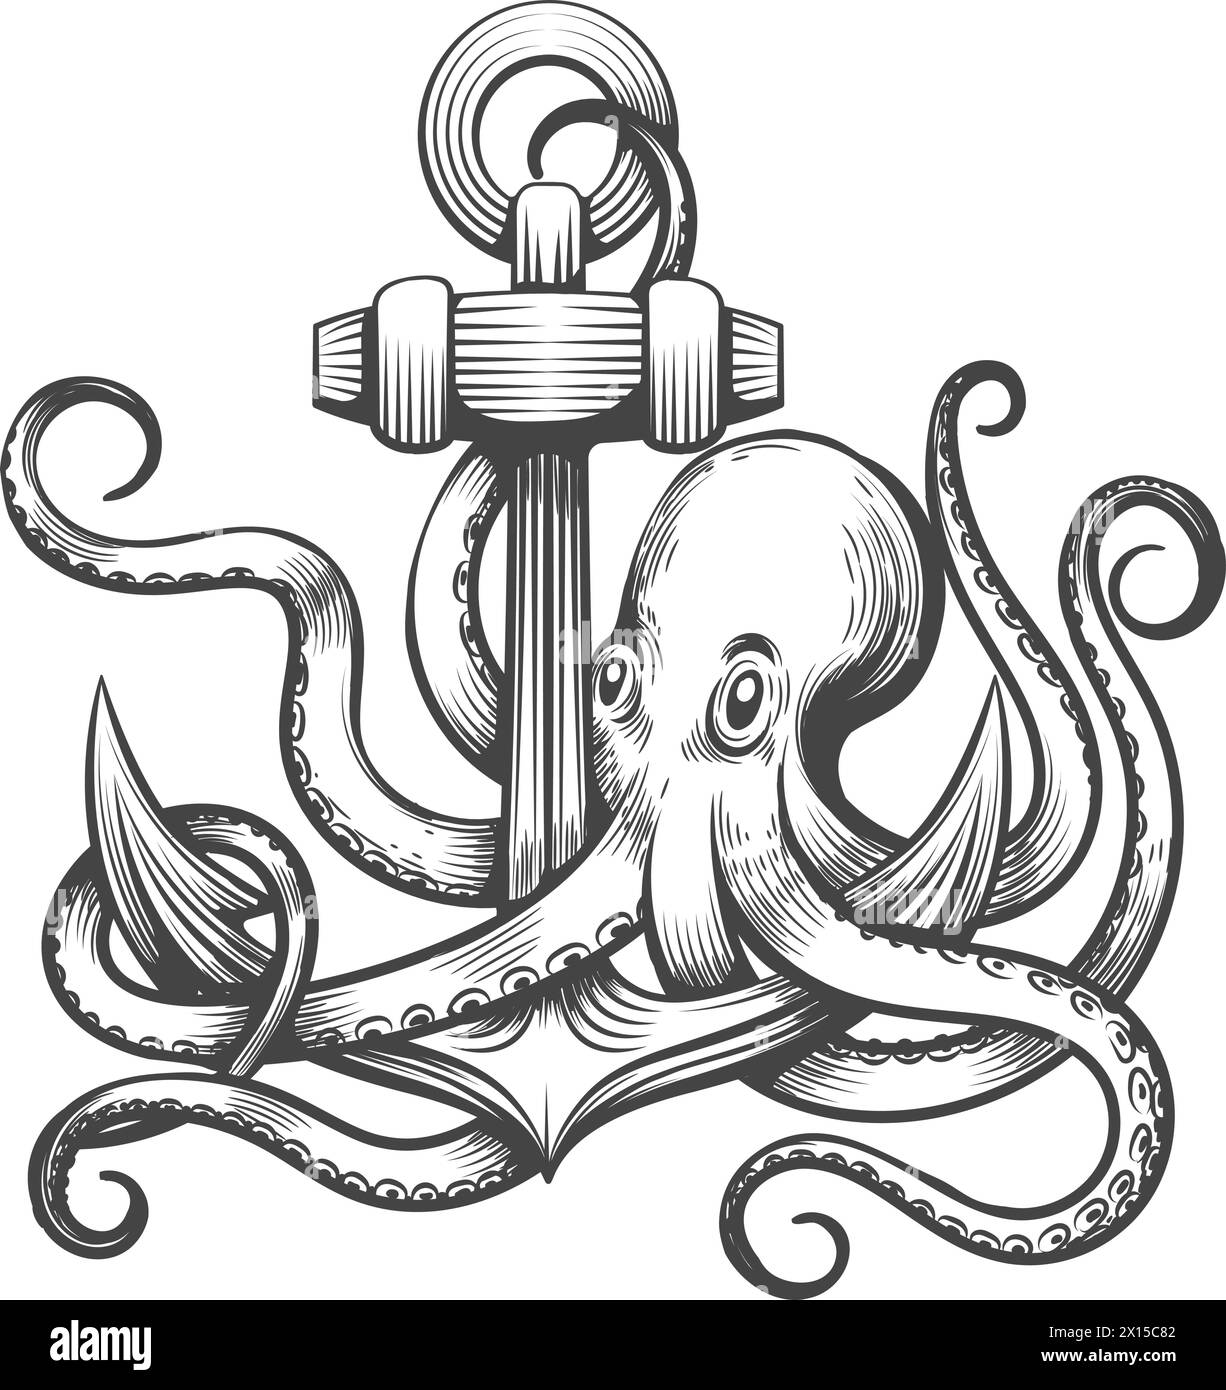 Engraving octopus and anchor tattoo Stock Vector